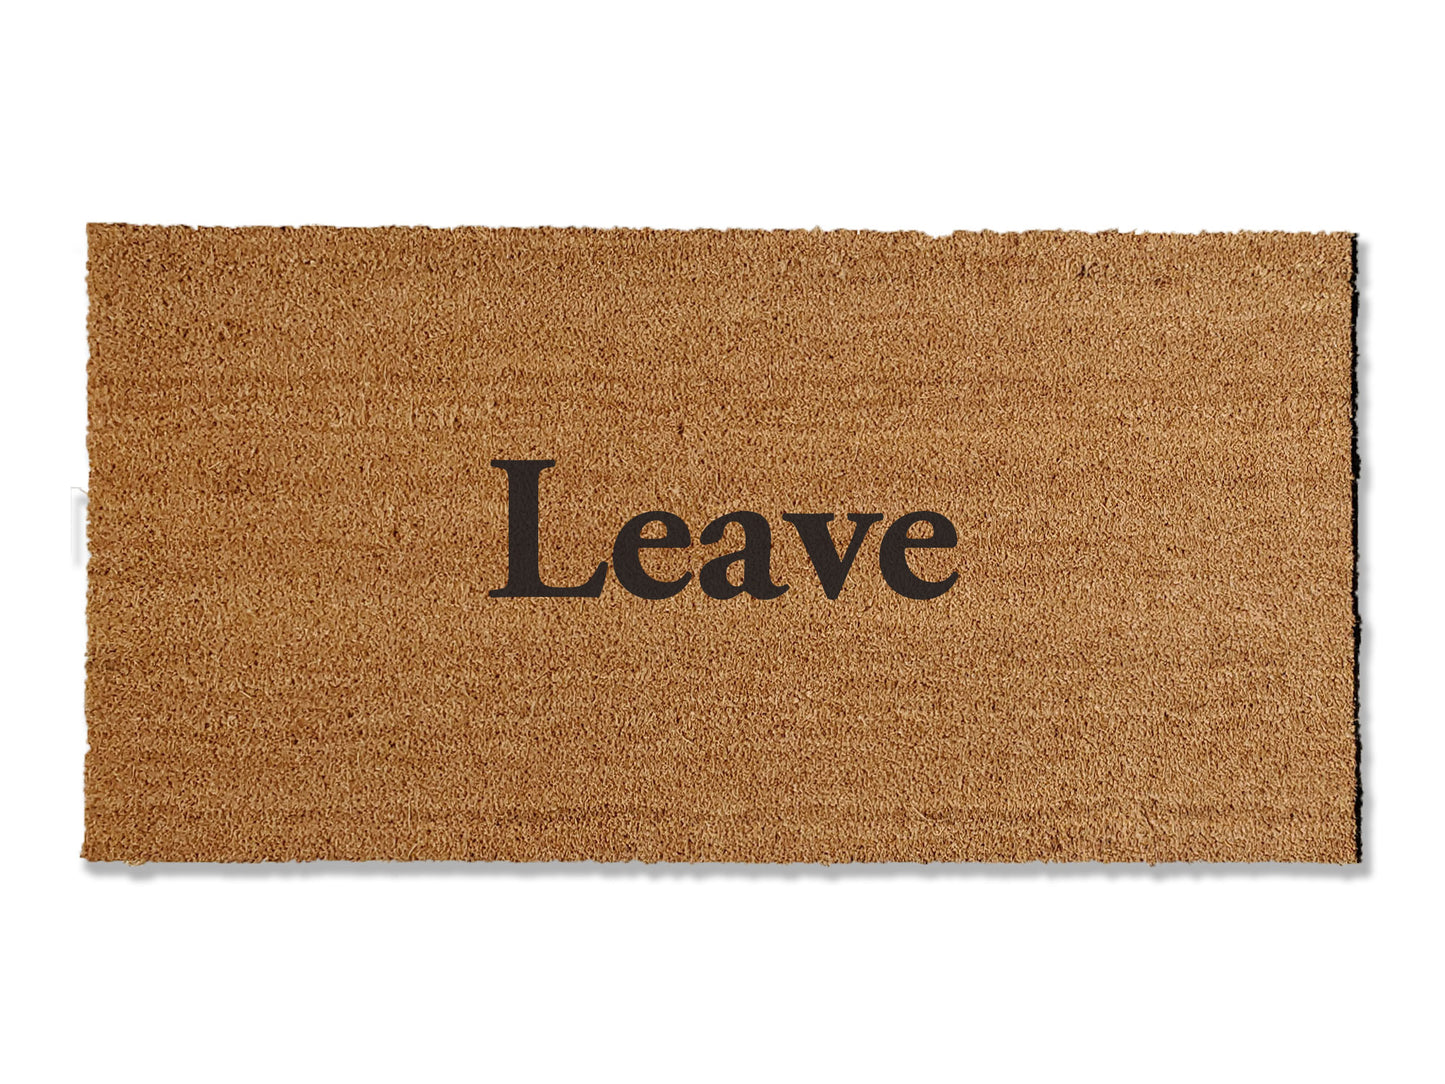 Add a touch of humor to your doorstep with our cheeky coir doormat boldly stating 'Leave.' This funny and somewhat rude mat is available in multiple sizes, promising to keep guests laughing or playfully deterring unwelcome visitors. Not only does it add a unique flair, but it's also highly effective at trapping dirt for a clean entrance.